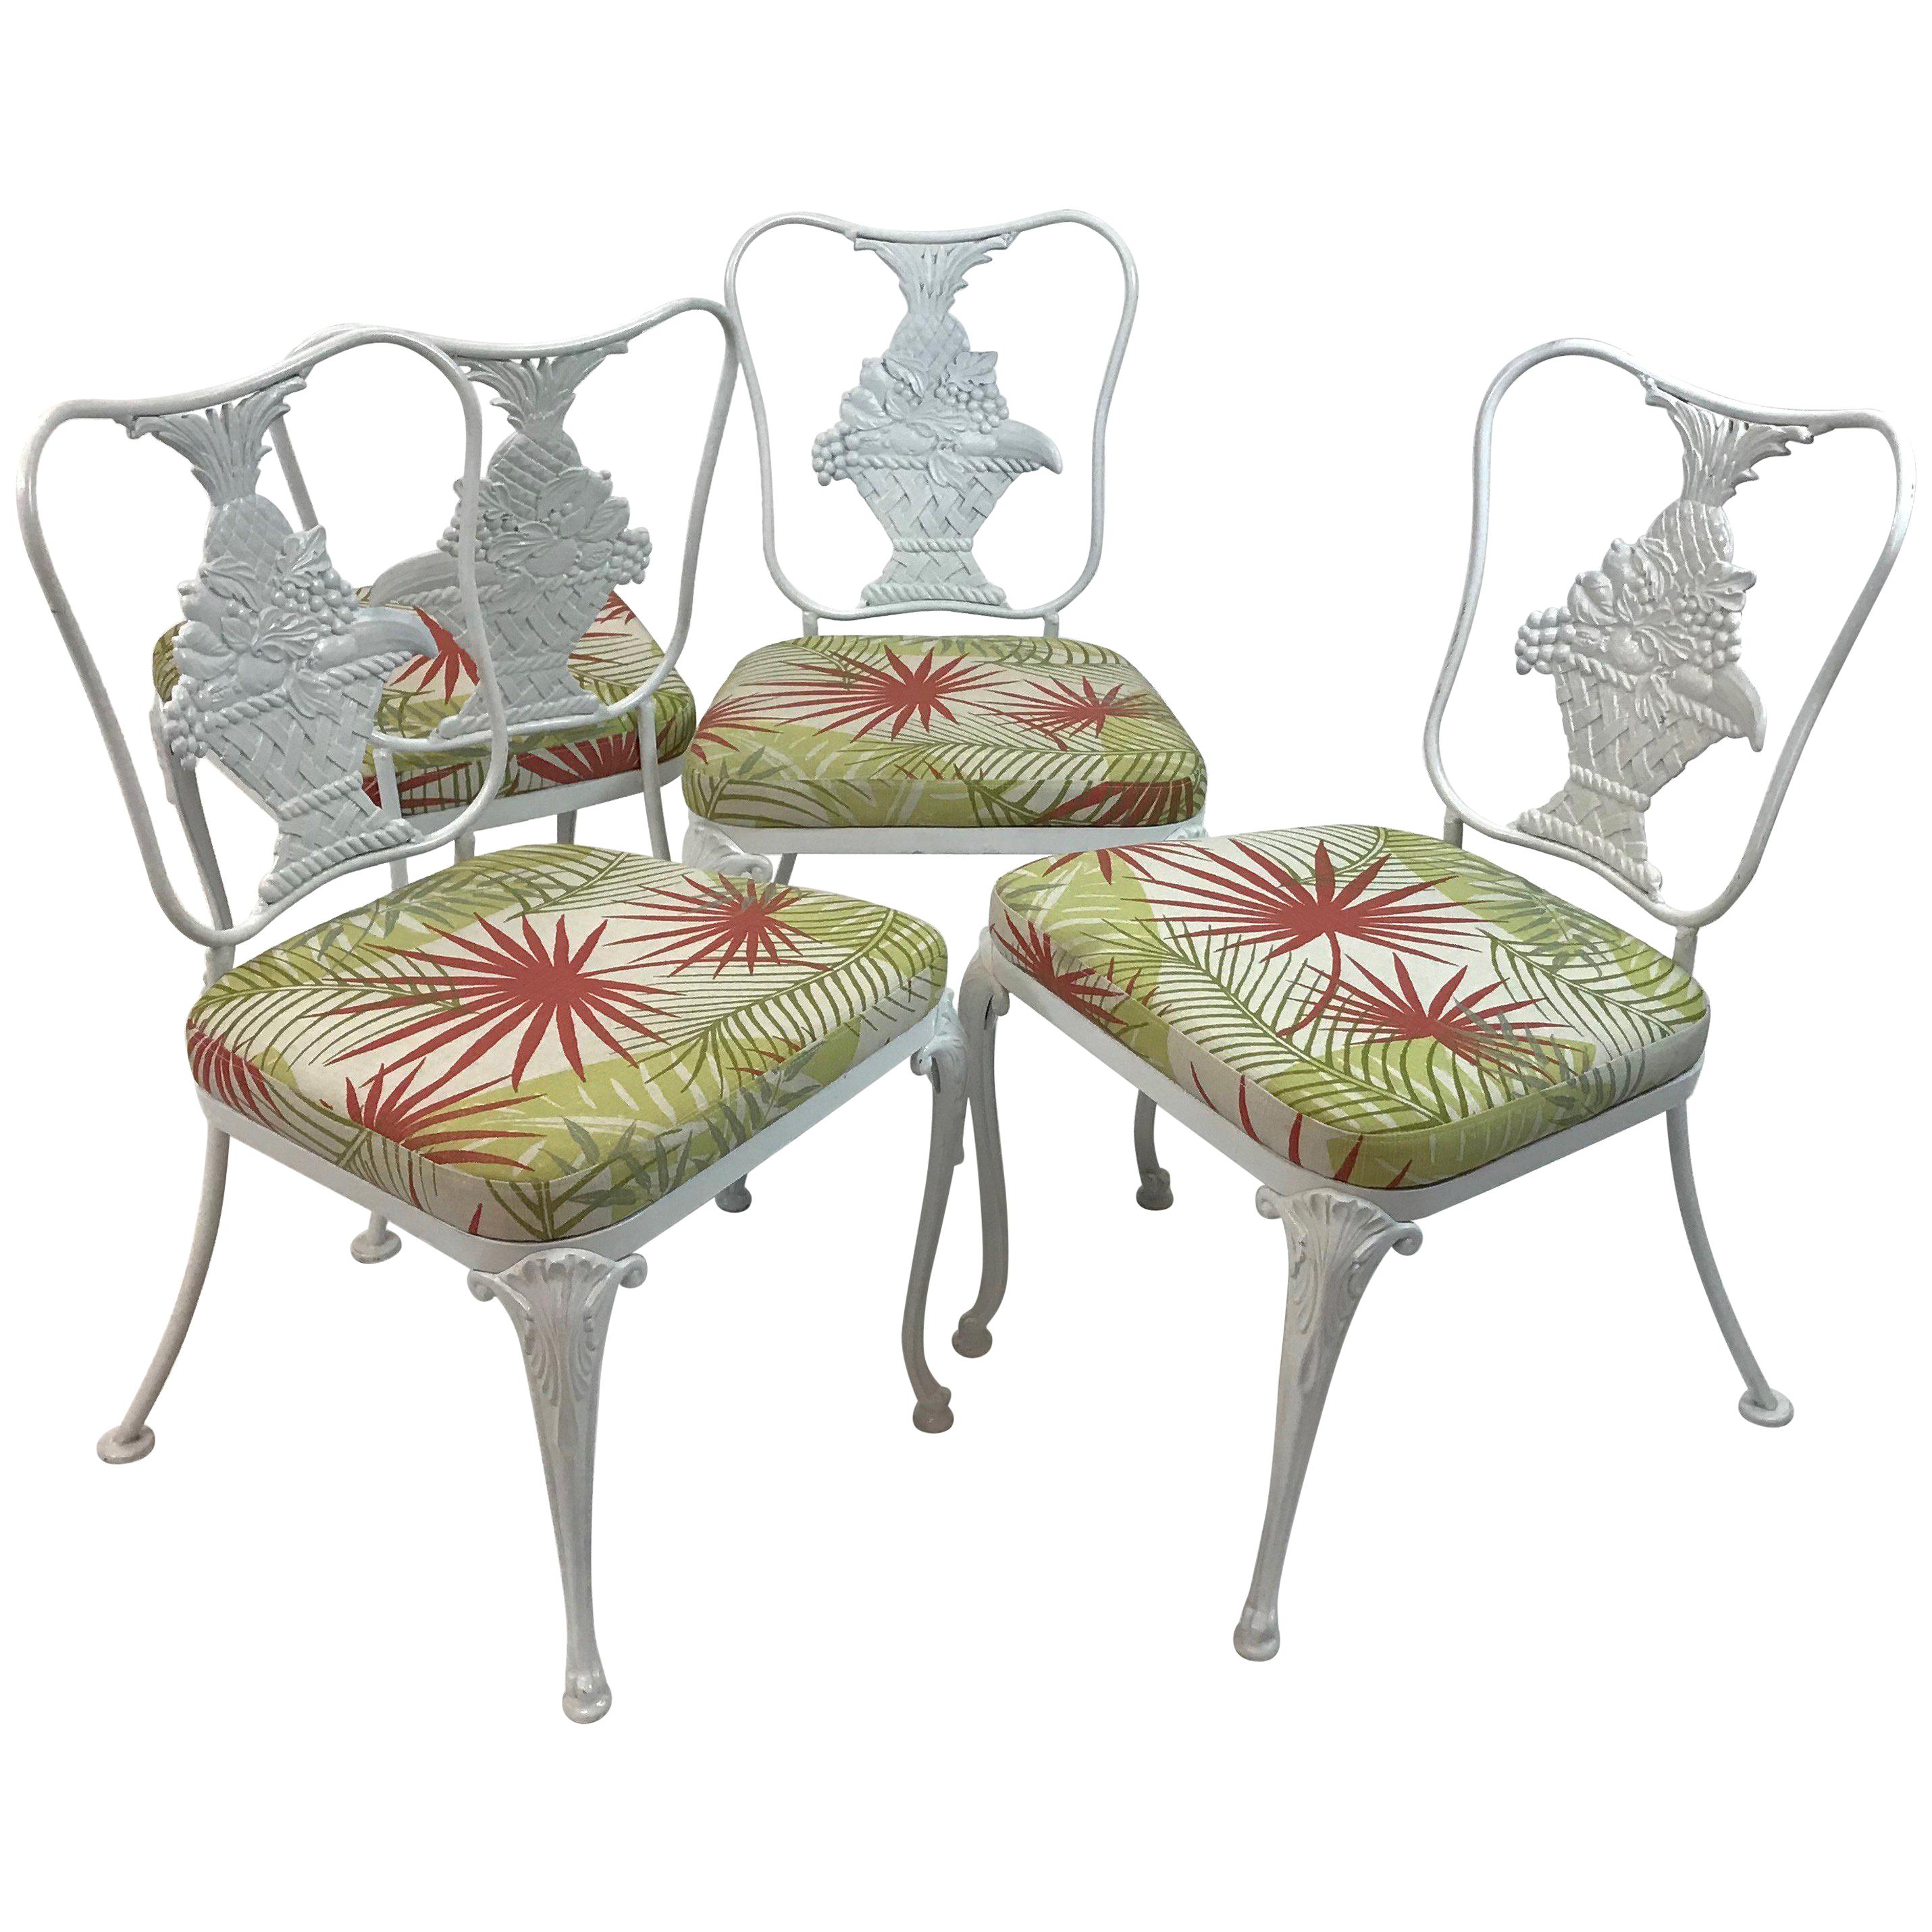 Hollywood Regency Wrought Iron Dining Chair Set